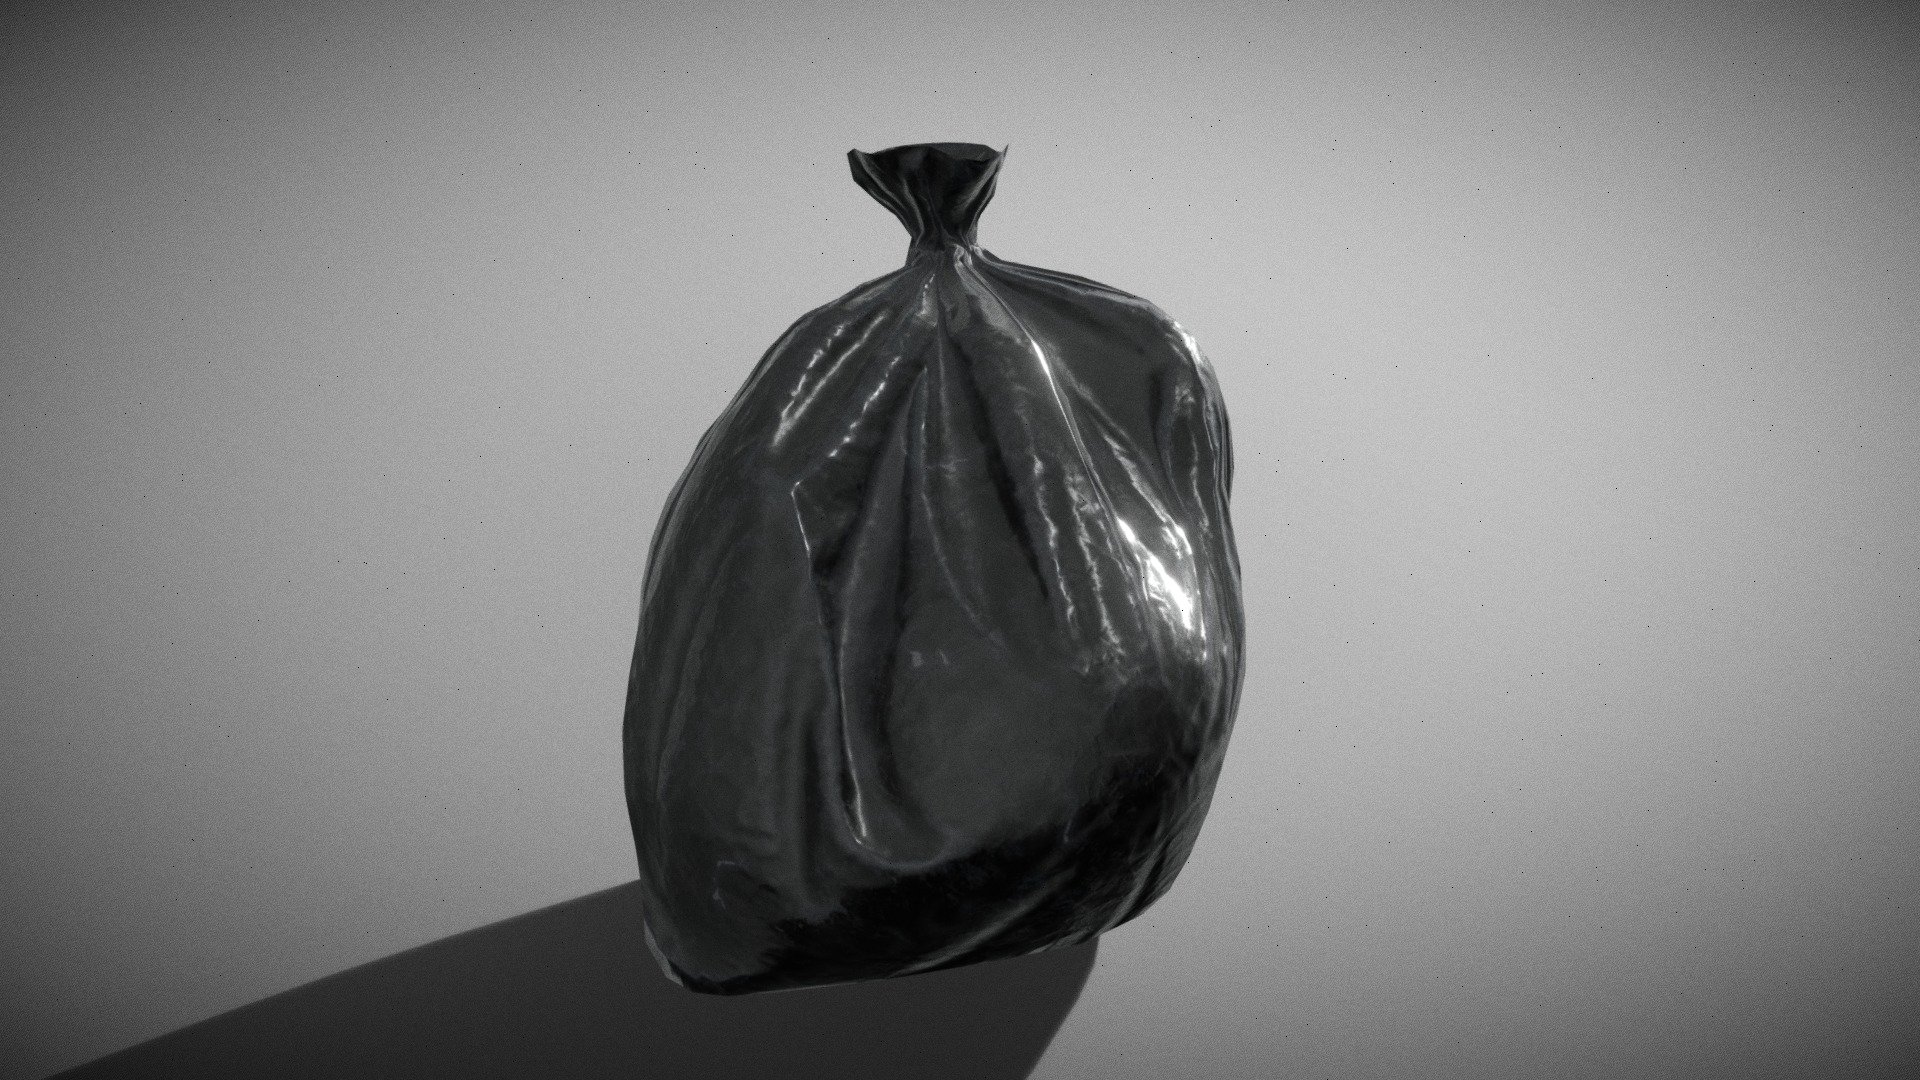 A bag of garbage.A 3D model to fill the game space or various scenes. Download, rate and comment if possible!) Thanks for your time! - A bag of garbage 3d model